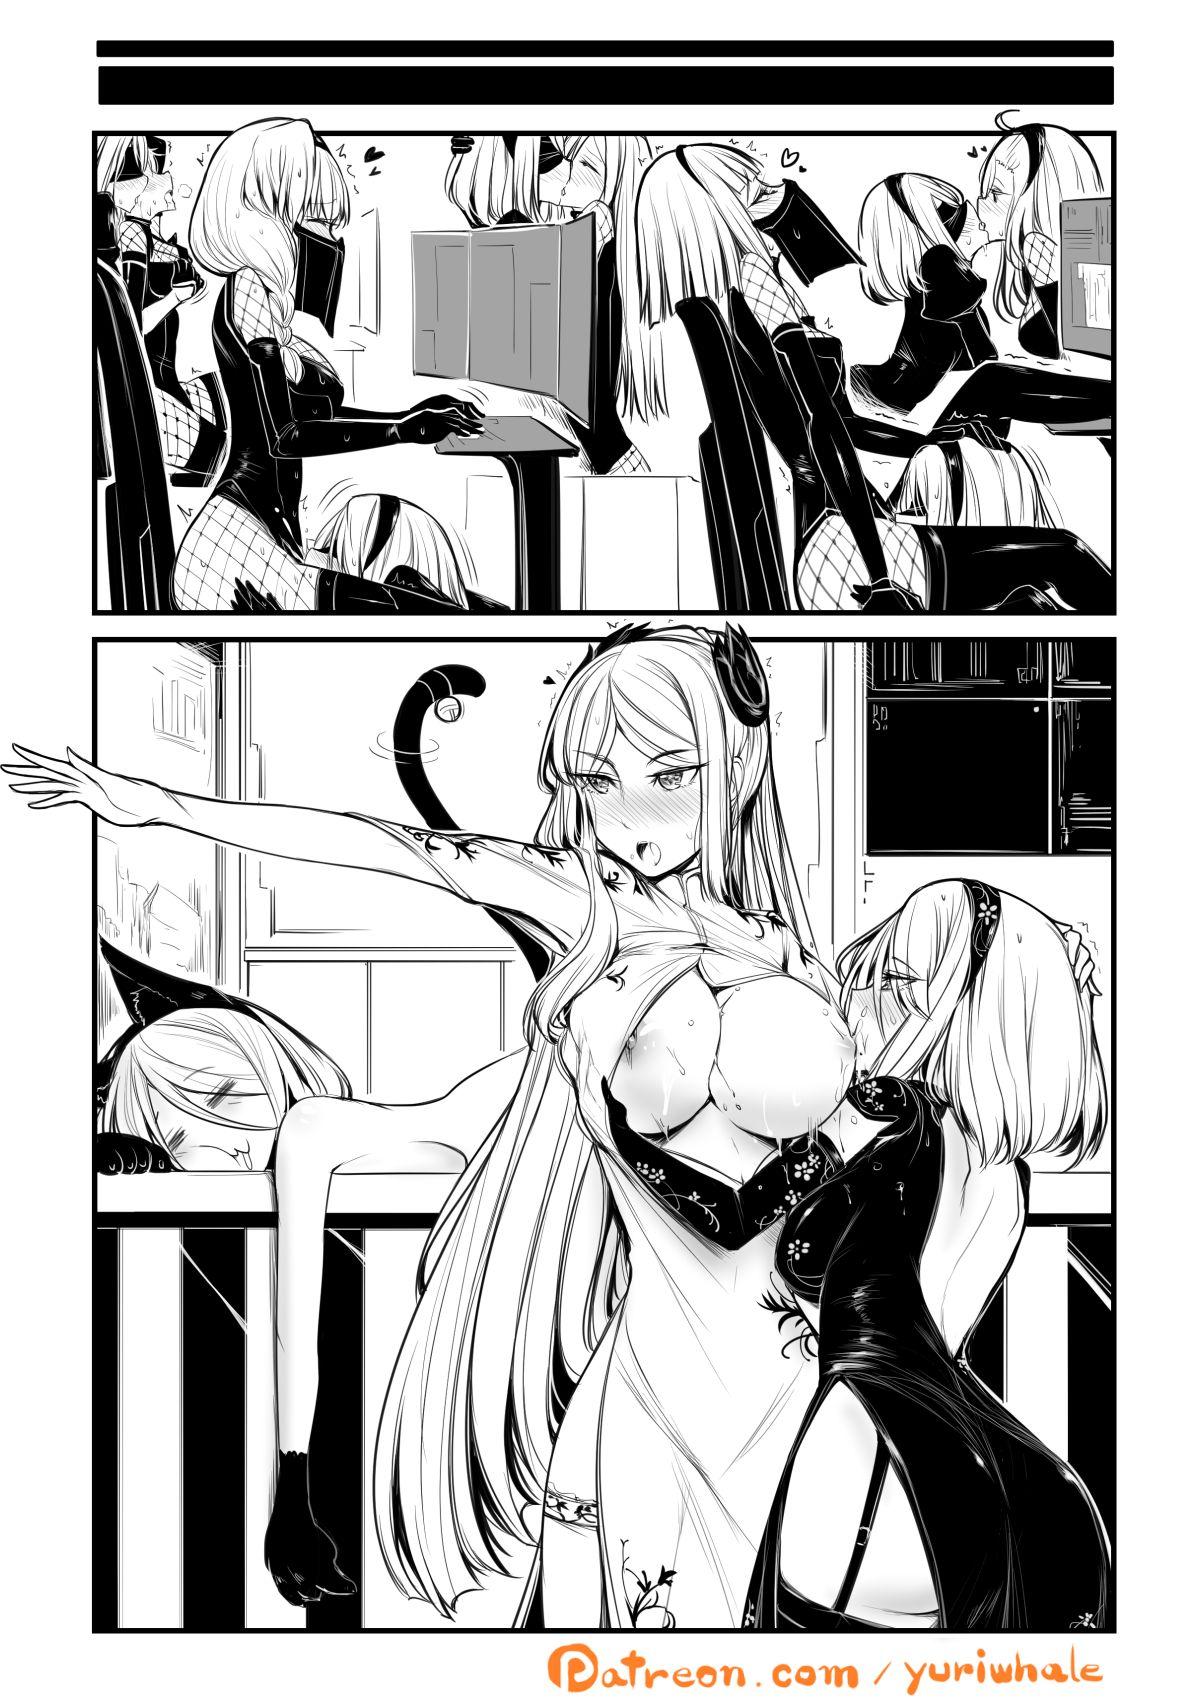 Nier : Automata Domina Commander X 2B X 6O 10 Pages Done 10